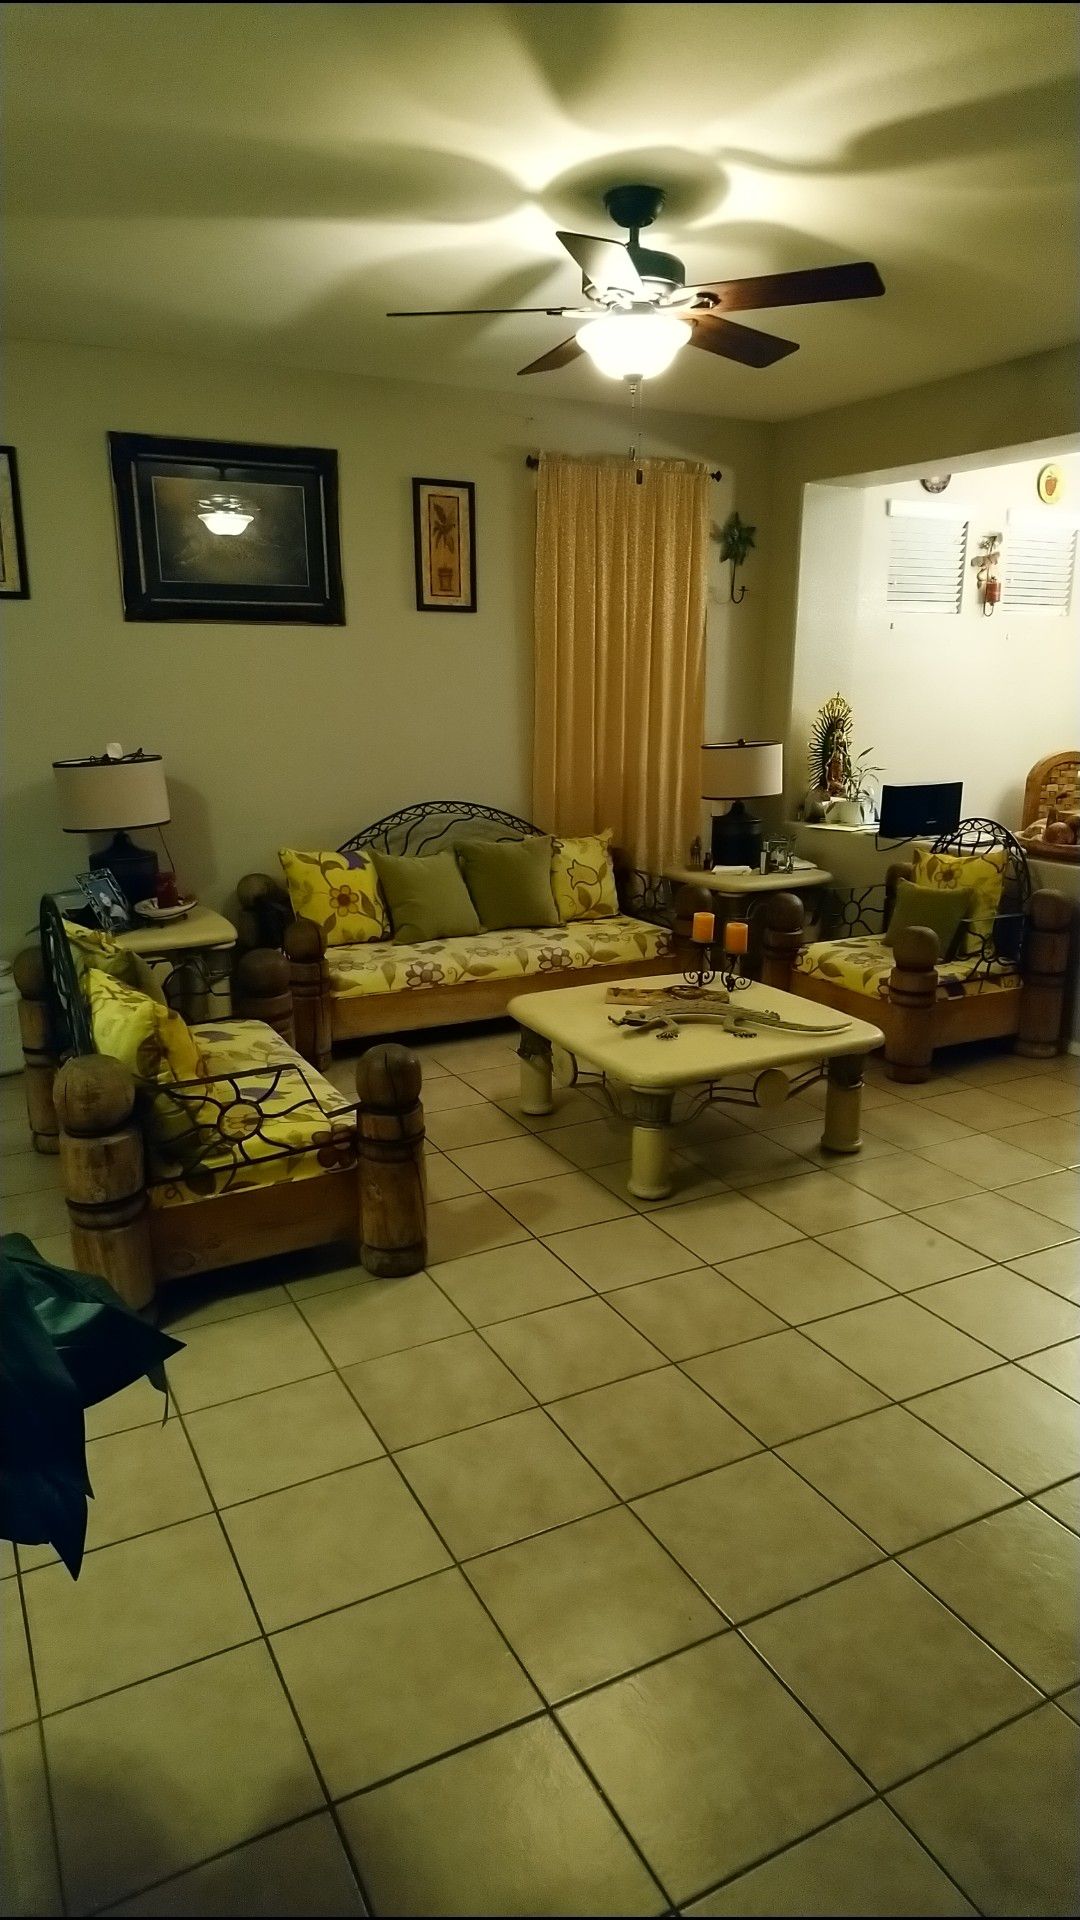 Living room forniture couches and coffe table set good condition